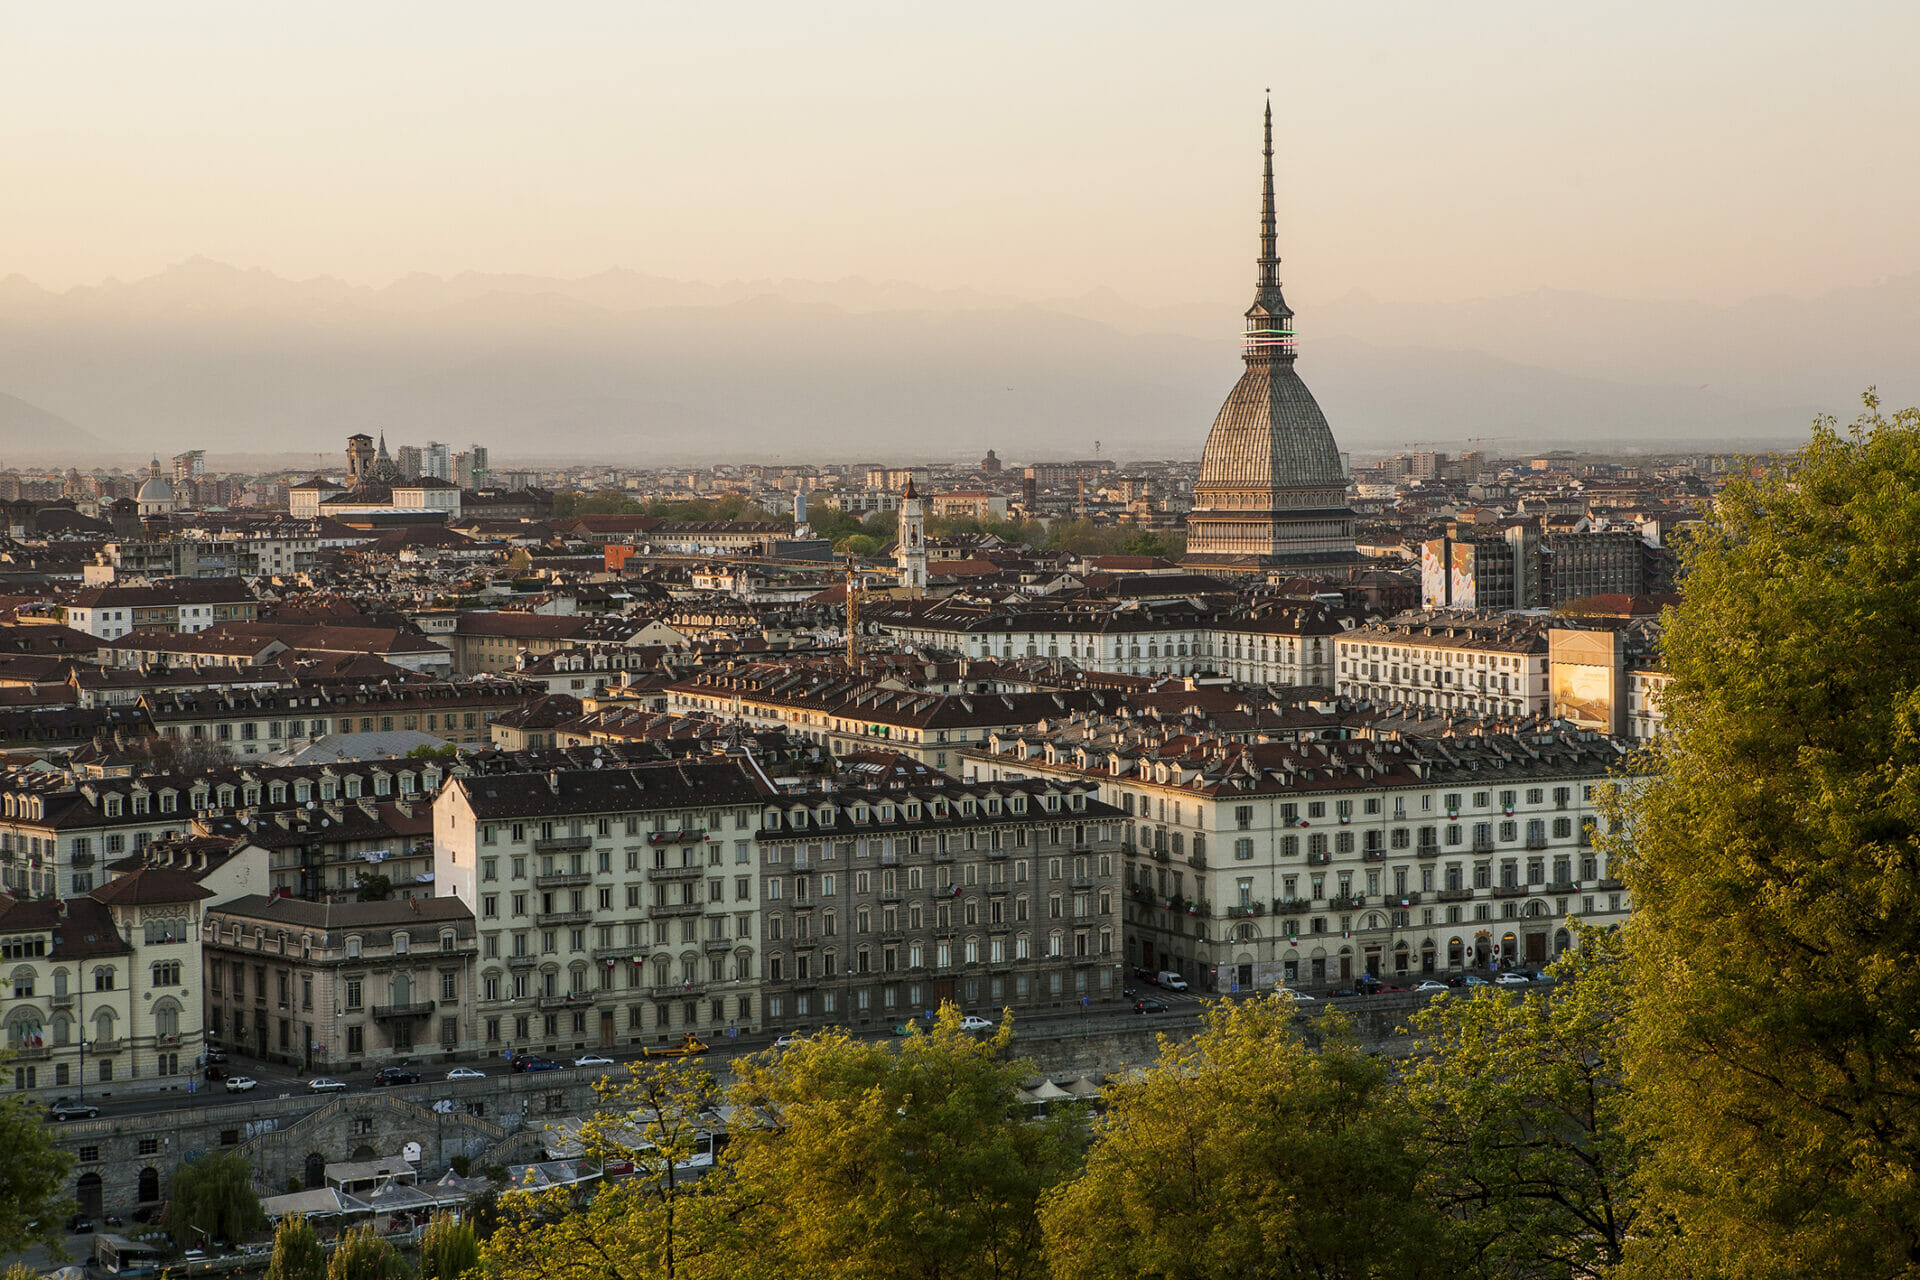 A view of Turin from above - courtesy Carlo Avataneo